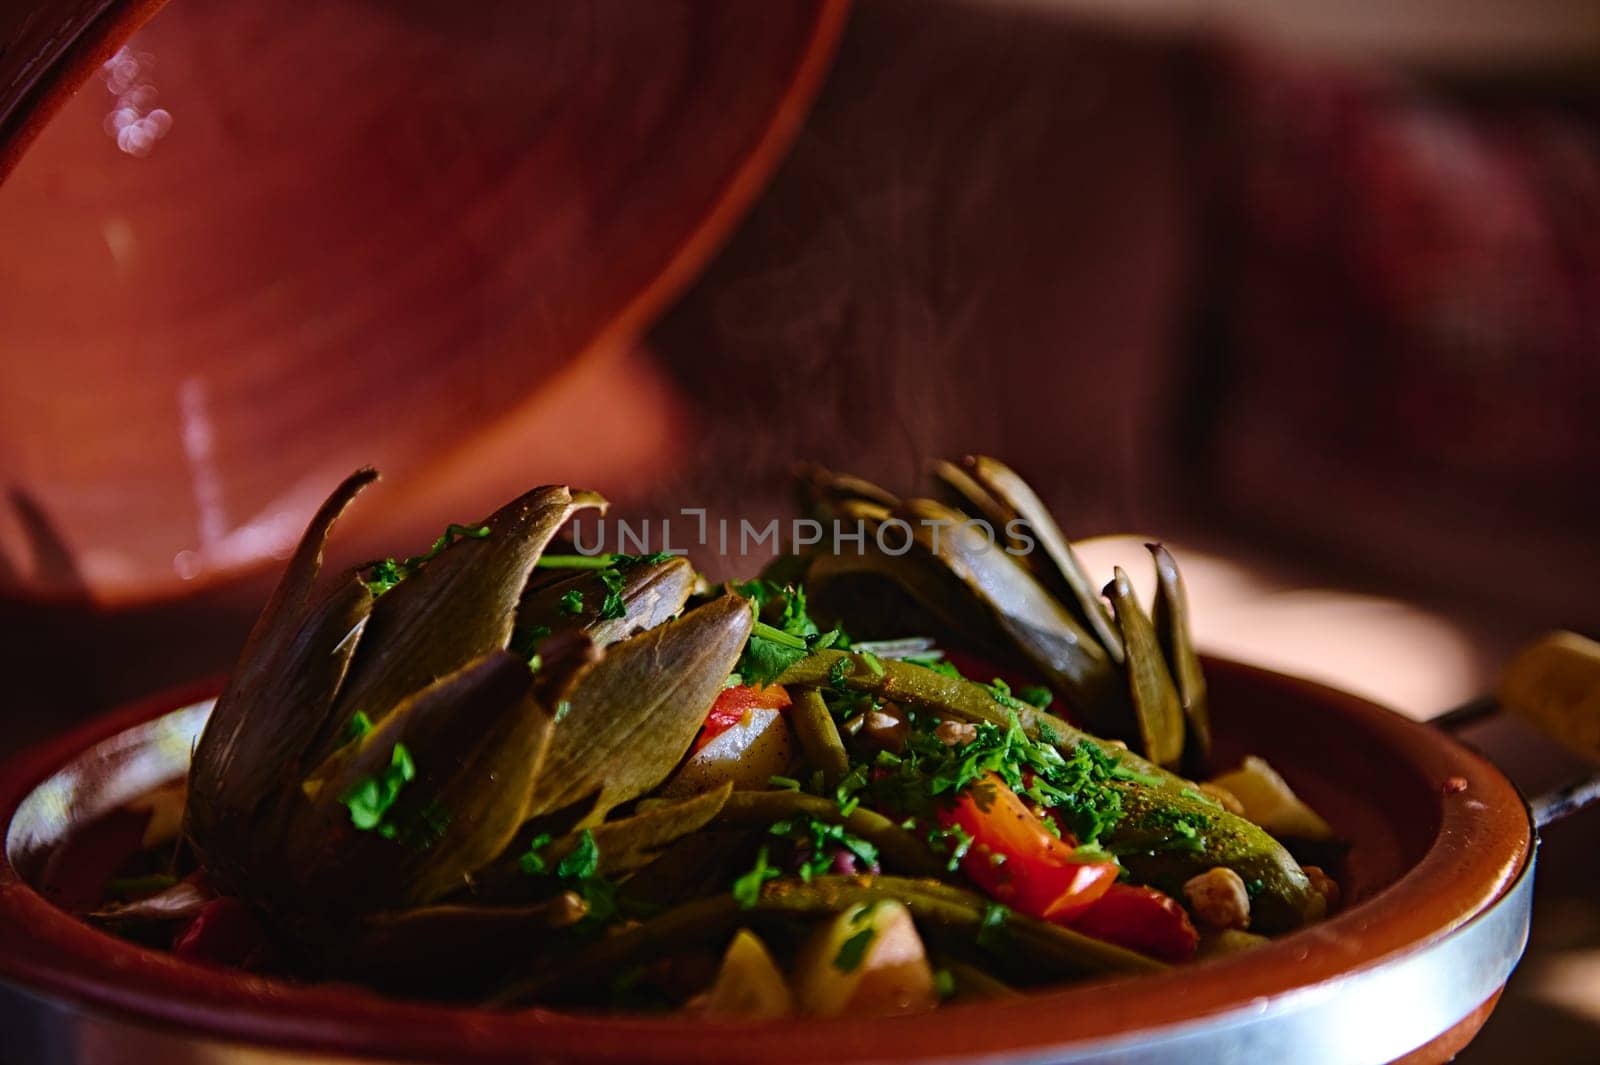 Close-up view vegetarian meal of artichoke and veggies steamed in clay dish and seasoned with fresh chopped parsley and cilantro. Moroccan tagine. Food background. Culture Cuisine Culinary Tradition